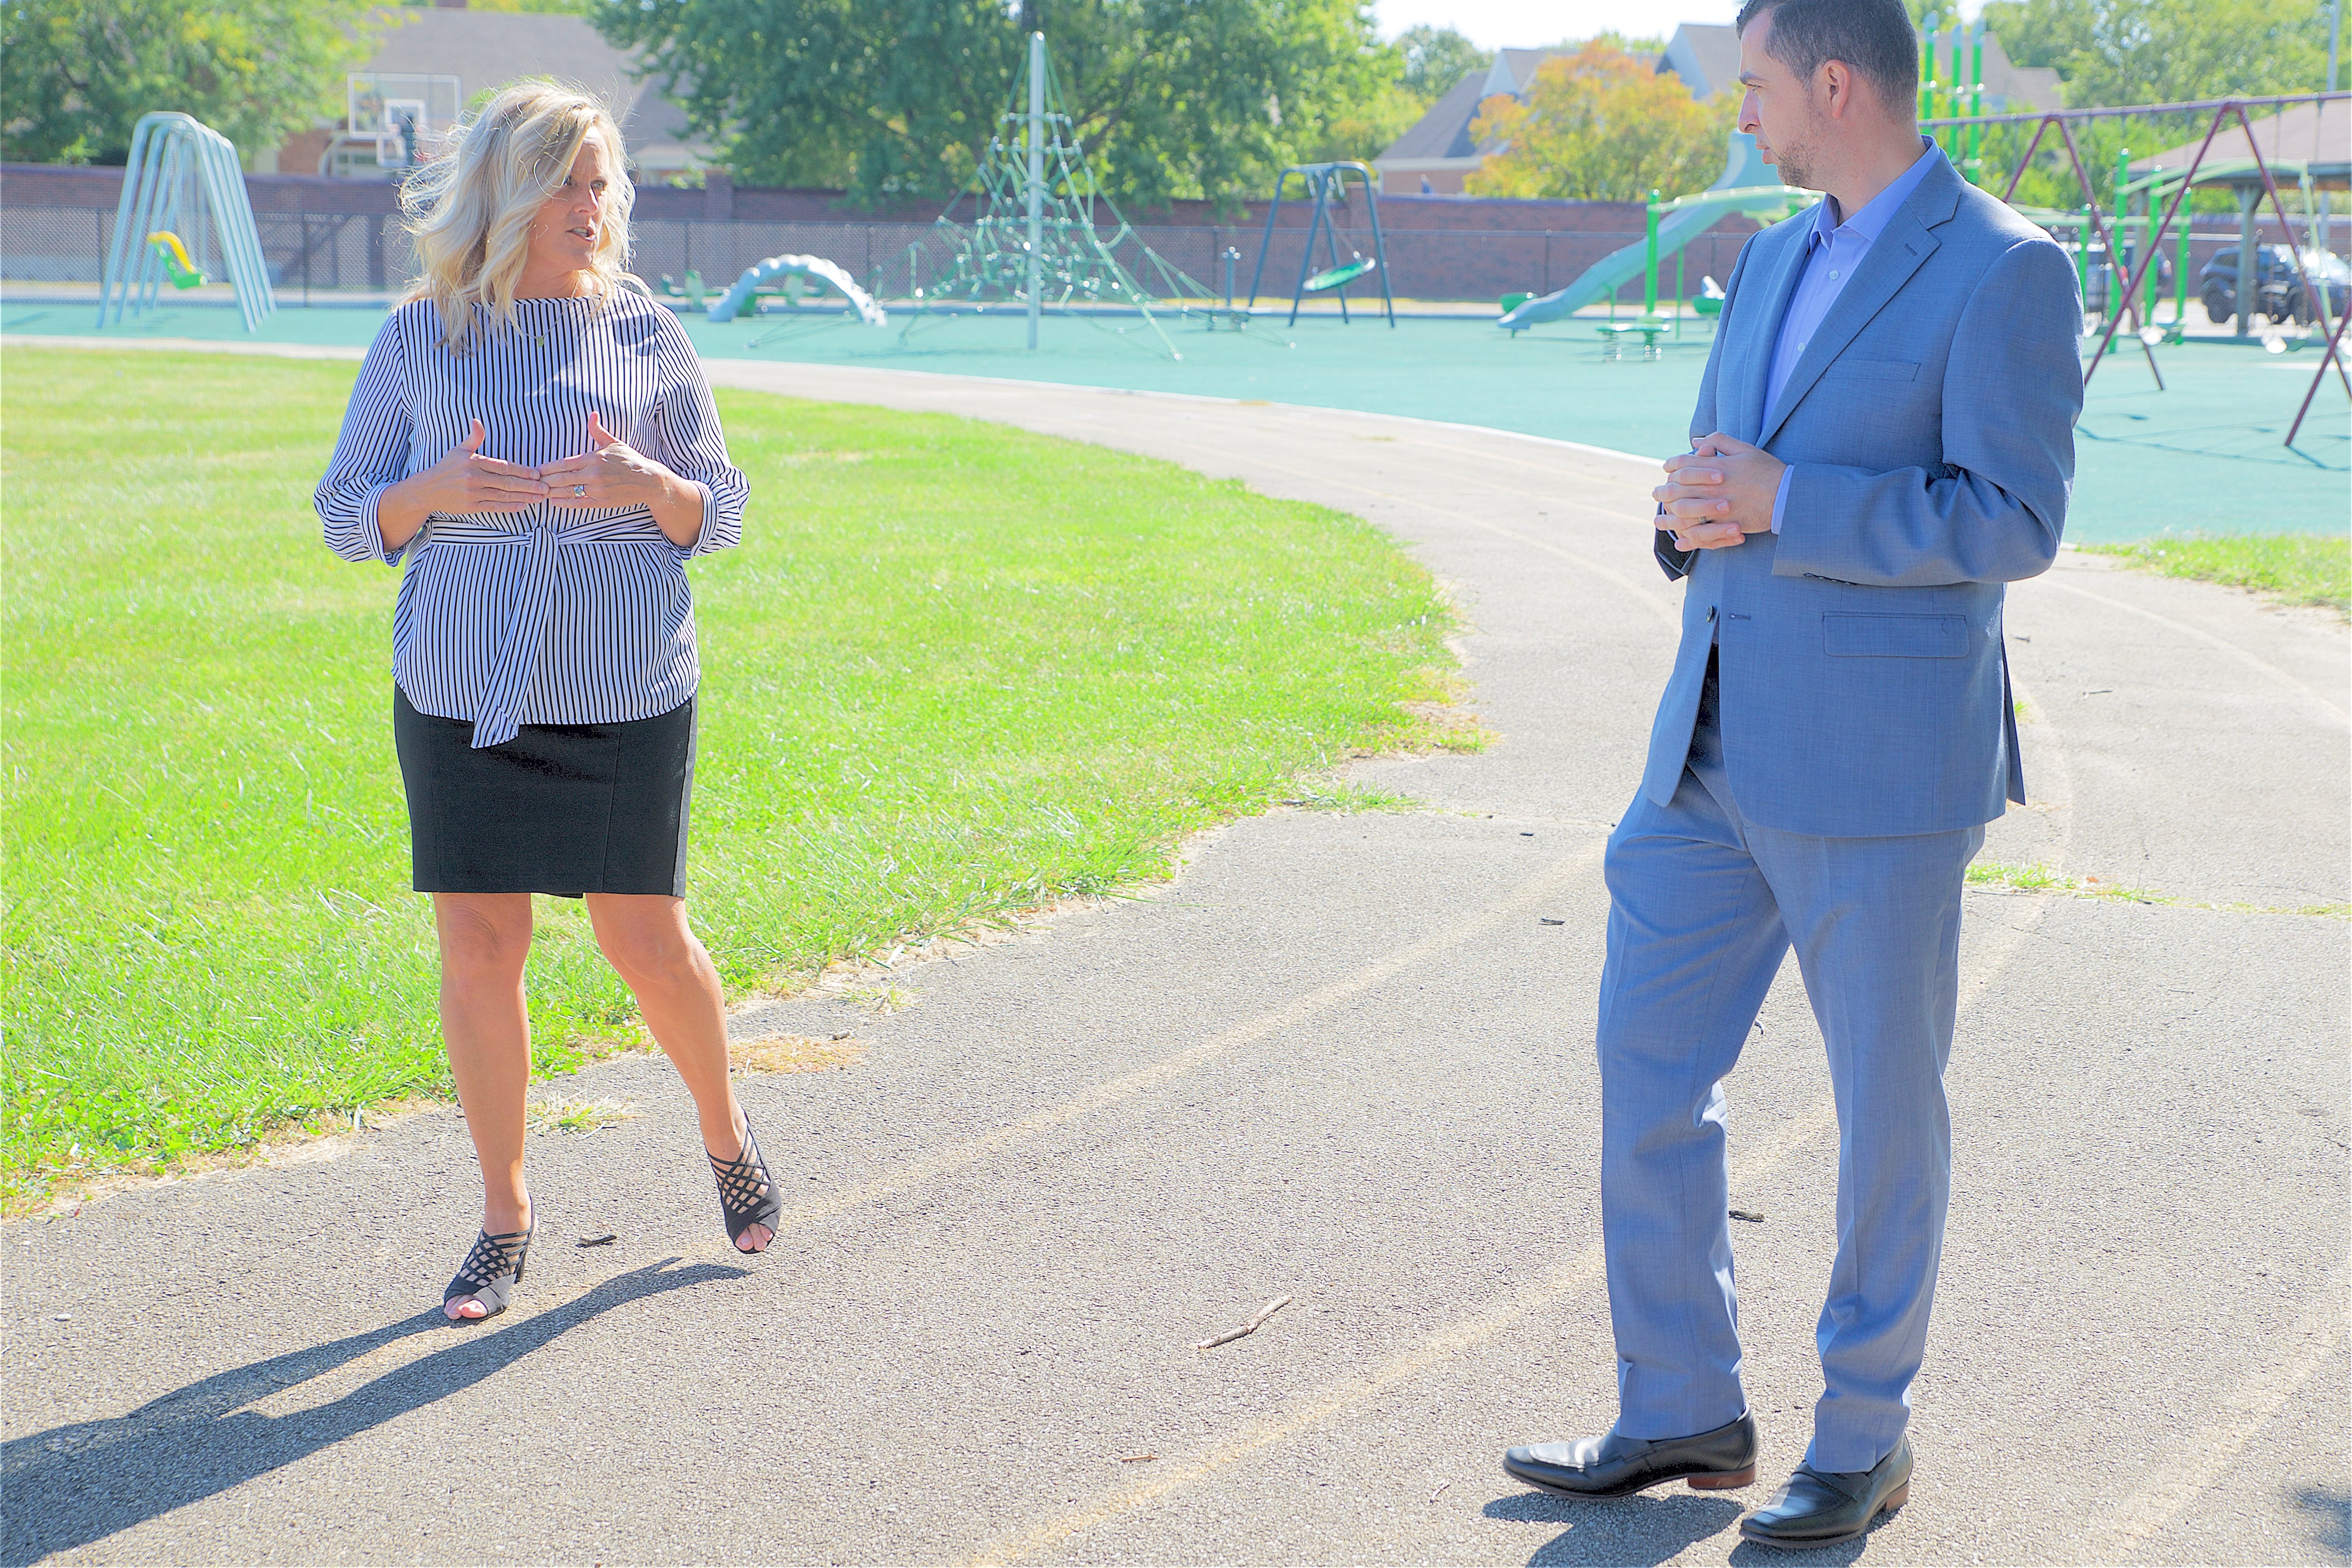 Indiana education chief Jennifer McCormick and Democratic state Senate candidate Fady Qaddoura.walk on a track as part of a political ad.